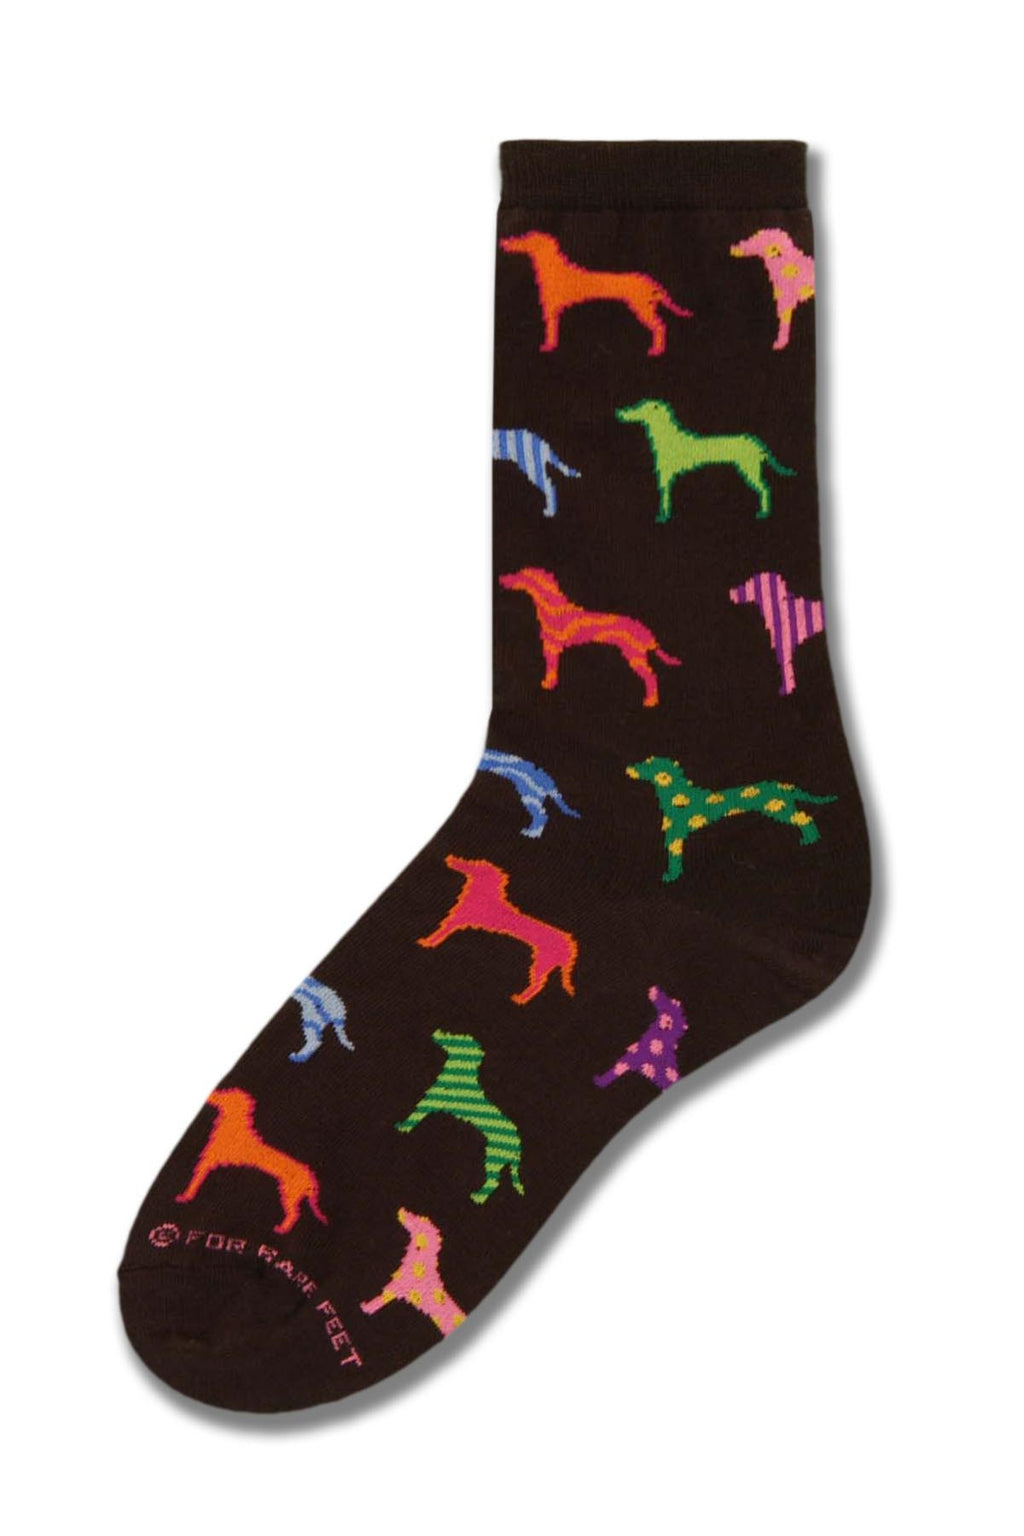 On a Black background Retro Dogs in almost every Color pop off the Black. FBF looks like Peter Max helped design this sock.